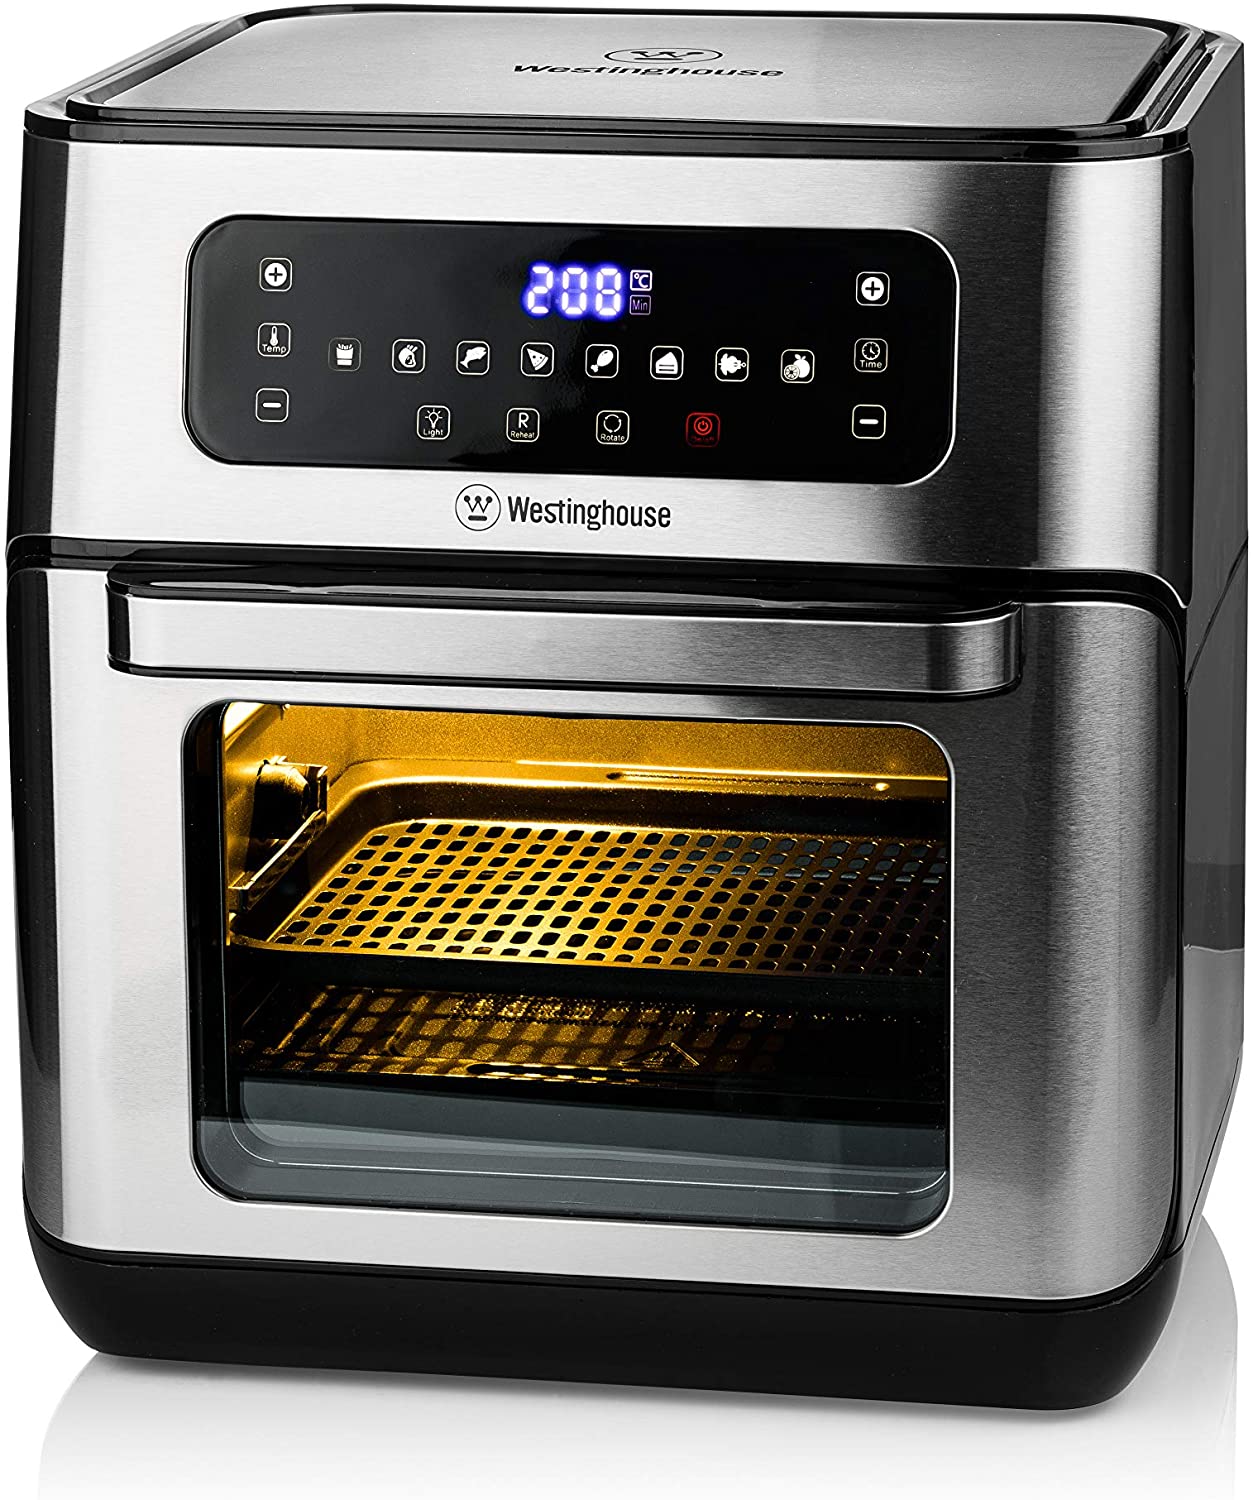 Westinghouse Hot air fryer oven.